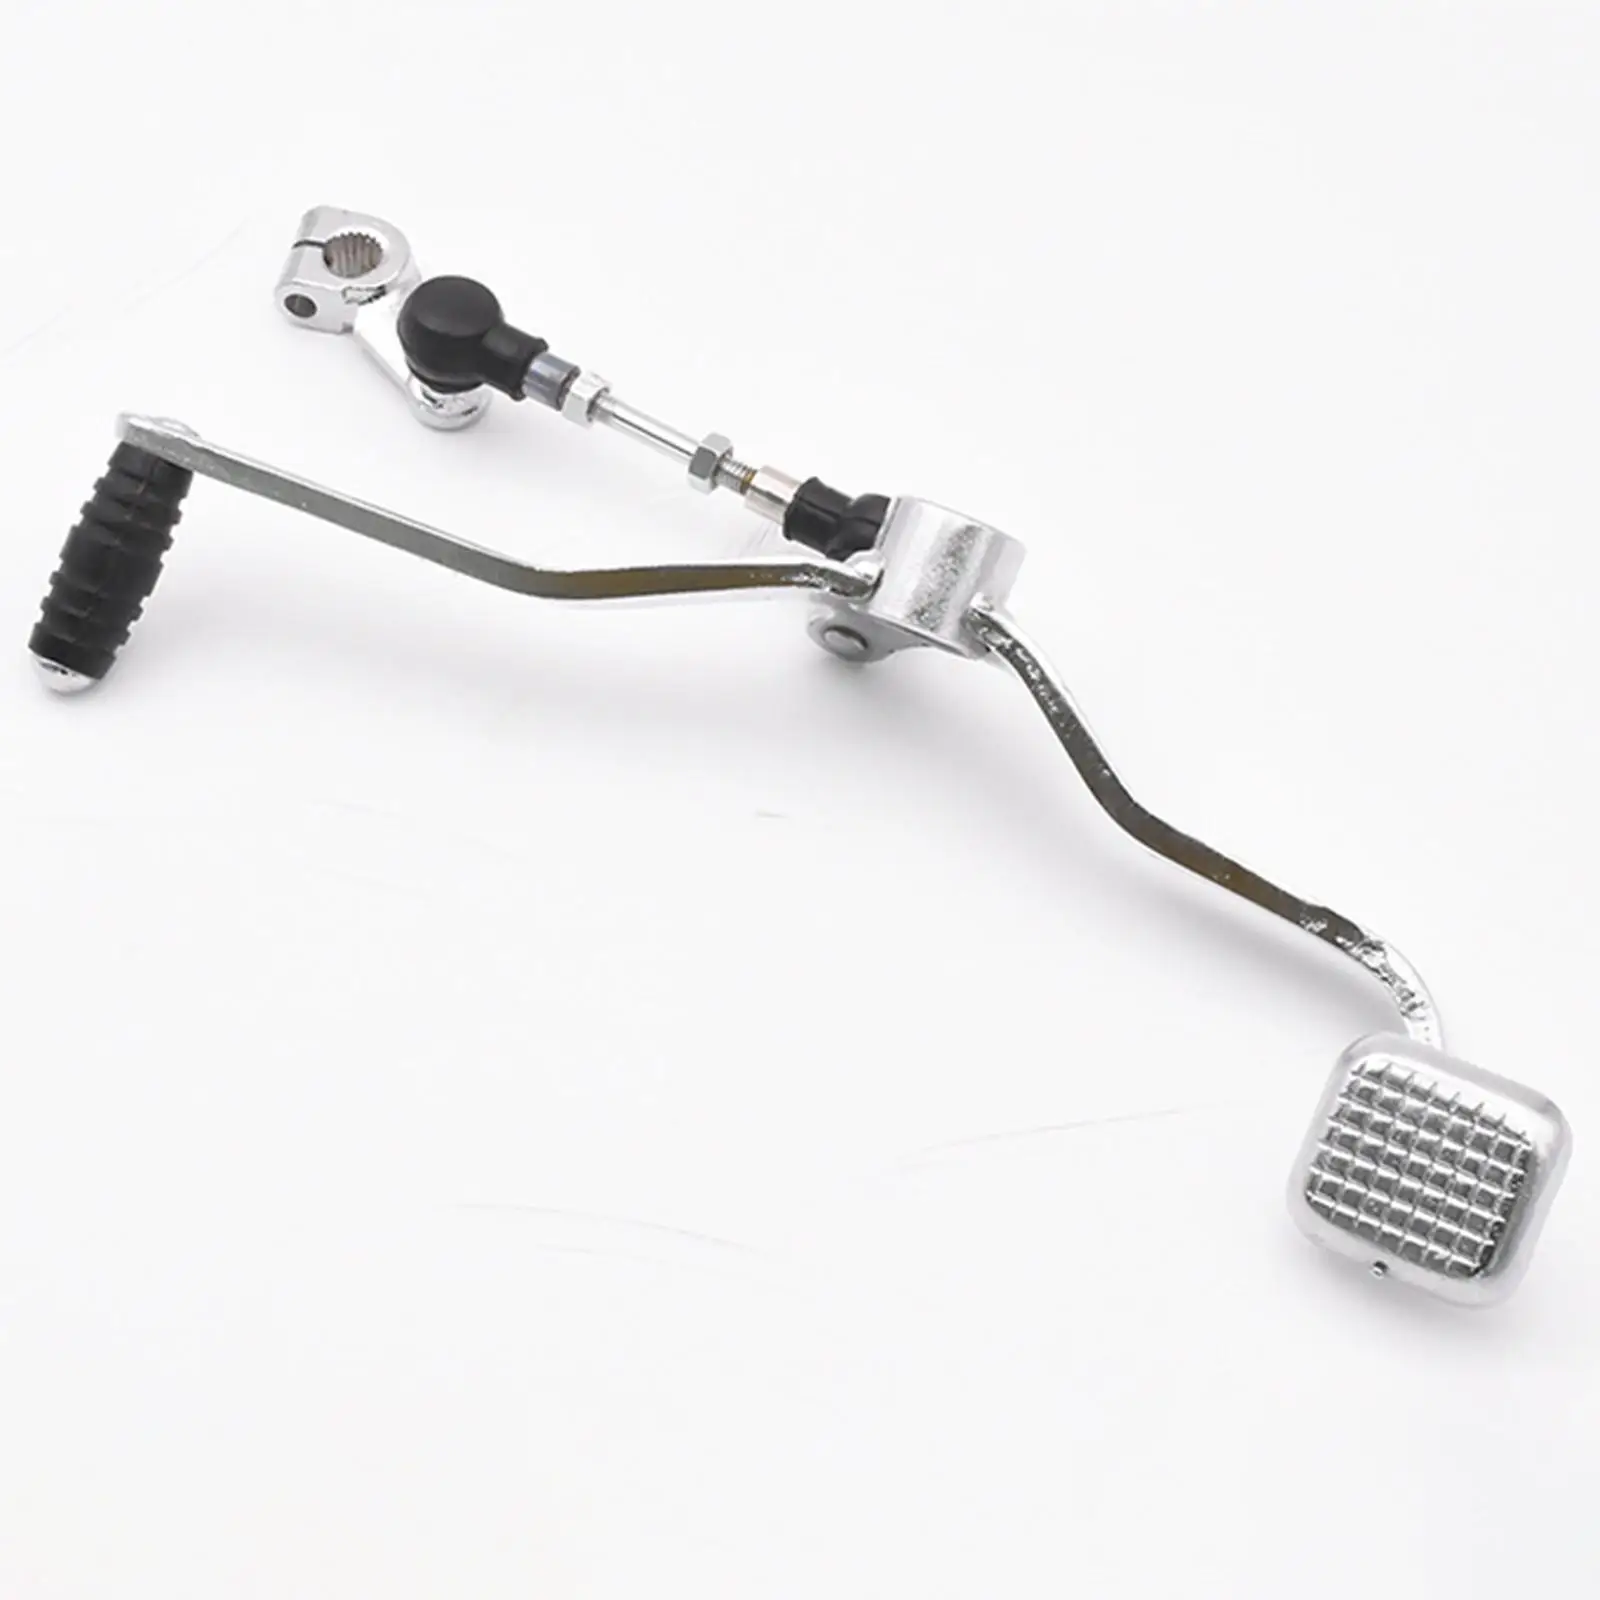 Motorcycle Gear Shift Foot Pedal Aluminium Alloy Gear Shift Lever for Motorcycle